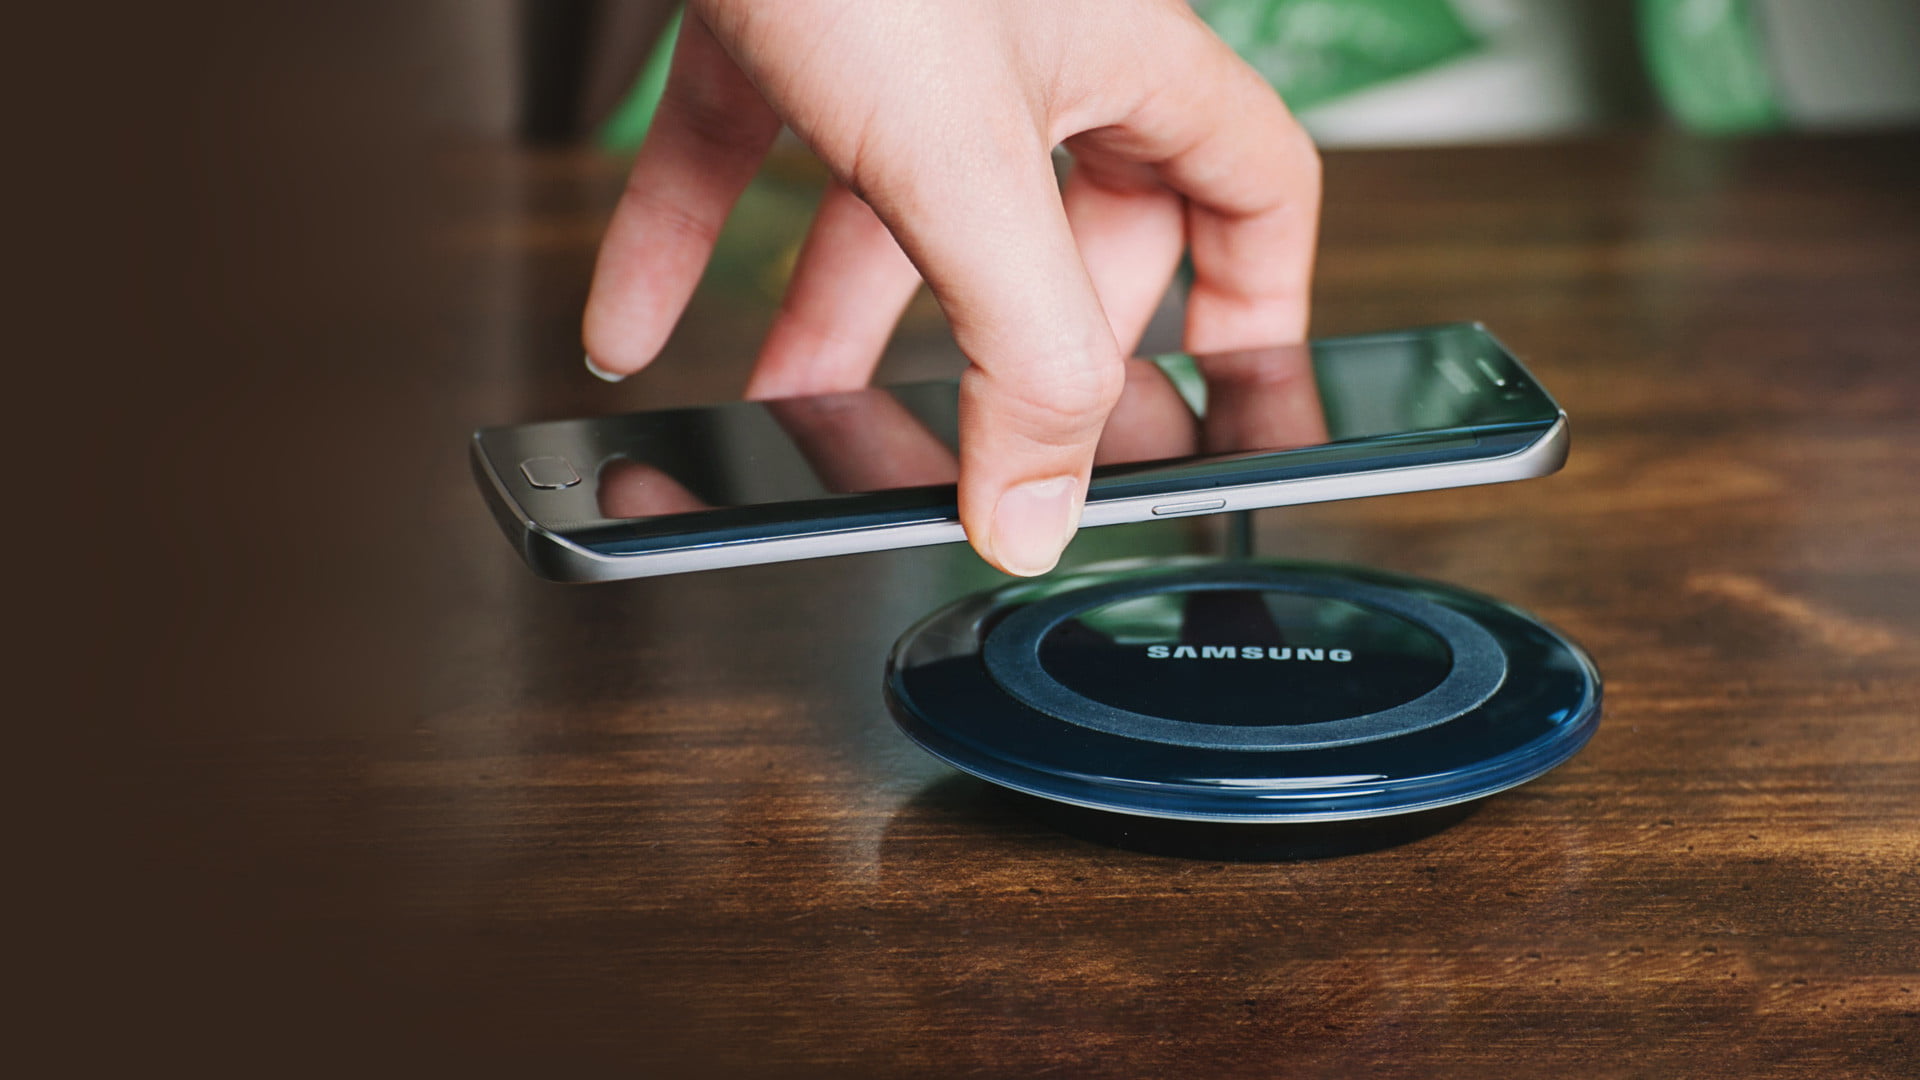 When It Comes To Wireless Charging, How Do You Do It?